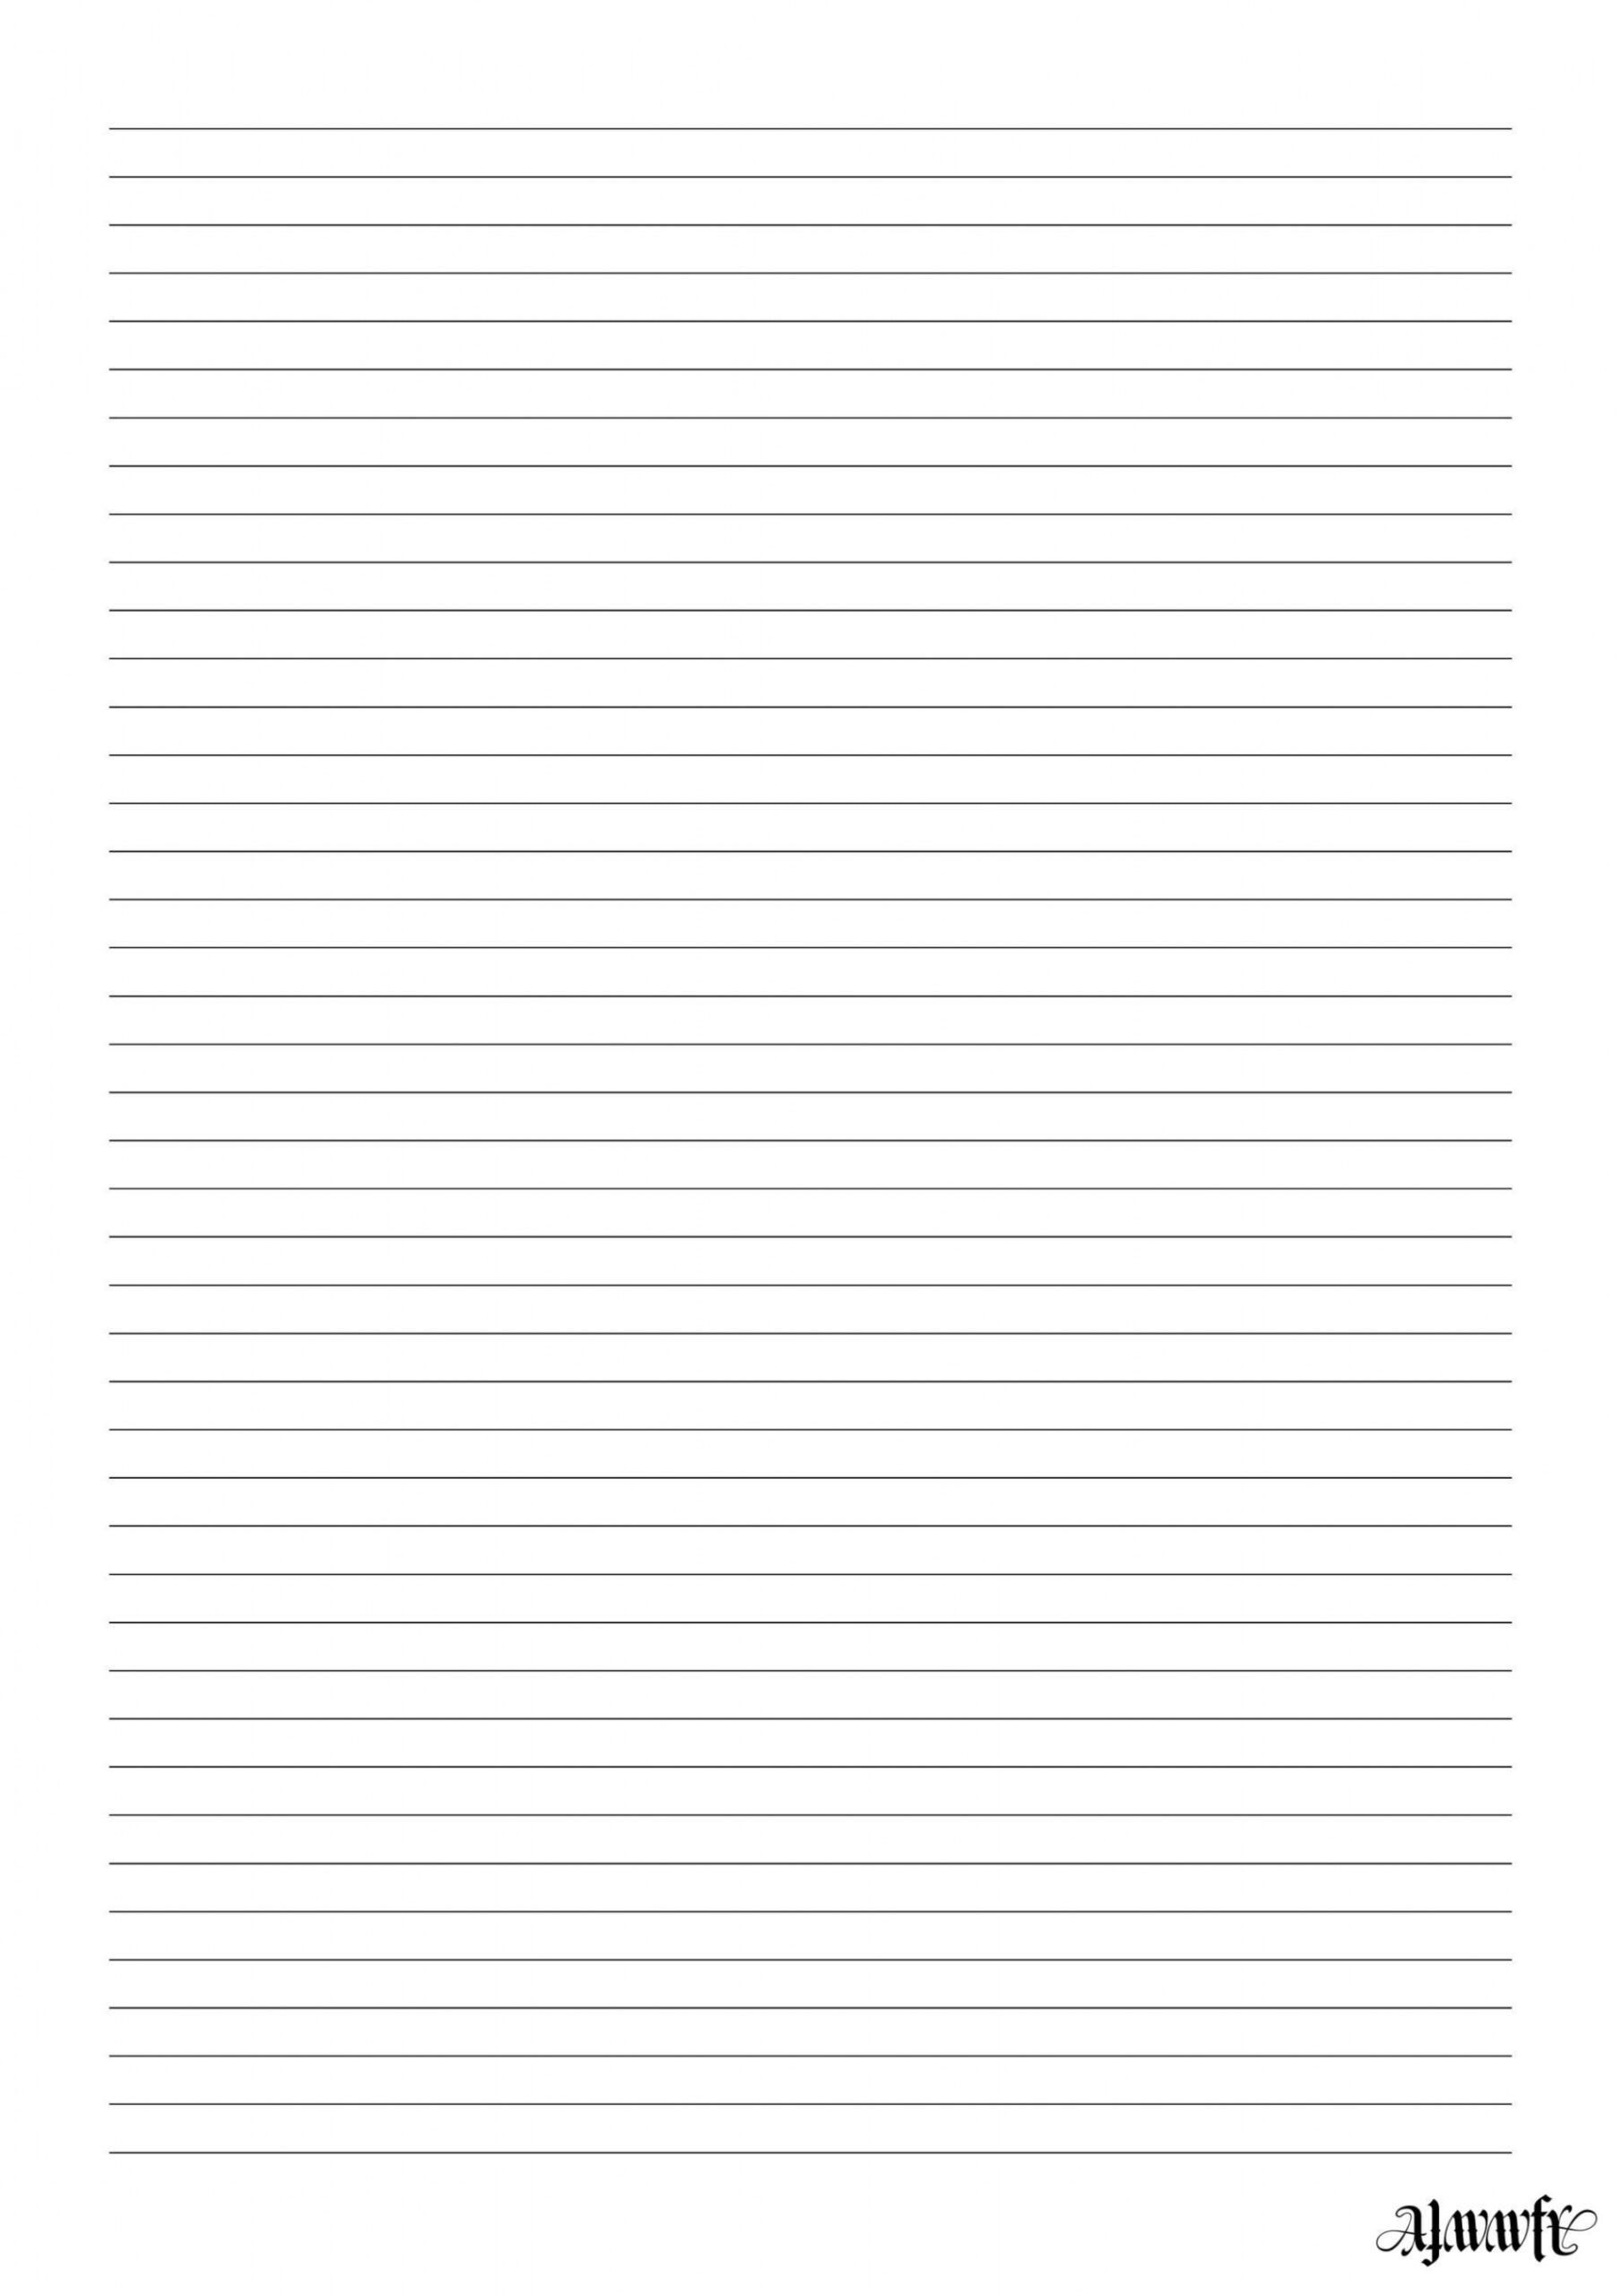 Lined Printable A paper, letter writing, personal use only - Printable Lined Writing Paper